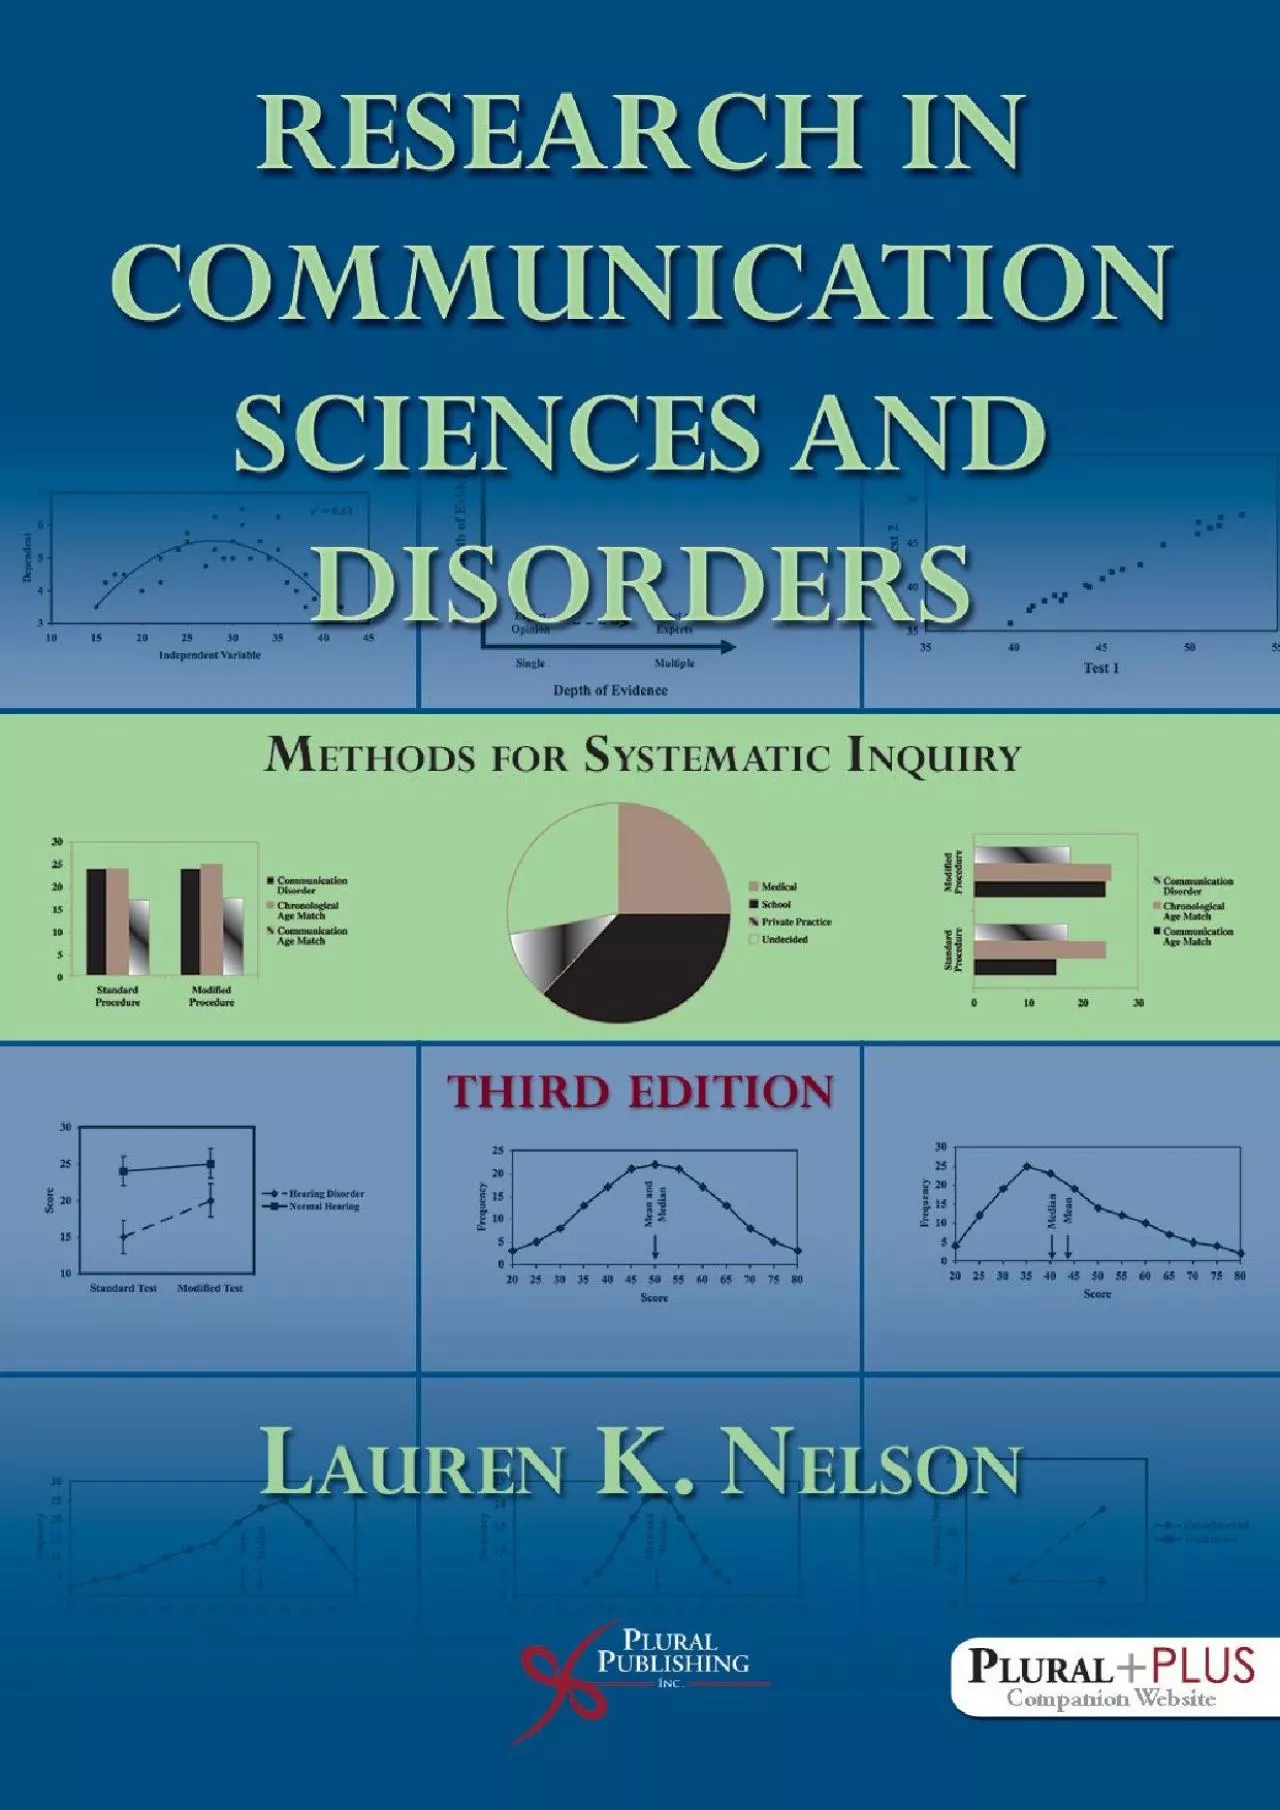 (EBOOK)-Research in Communication Sciences and Disorders: Methods for Systematic Inquiry,